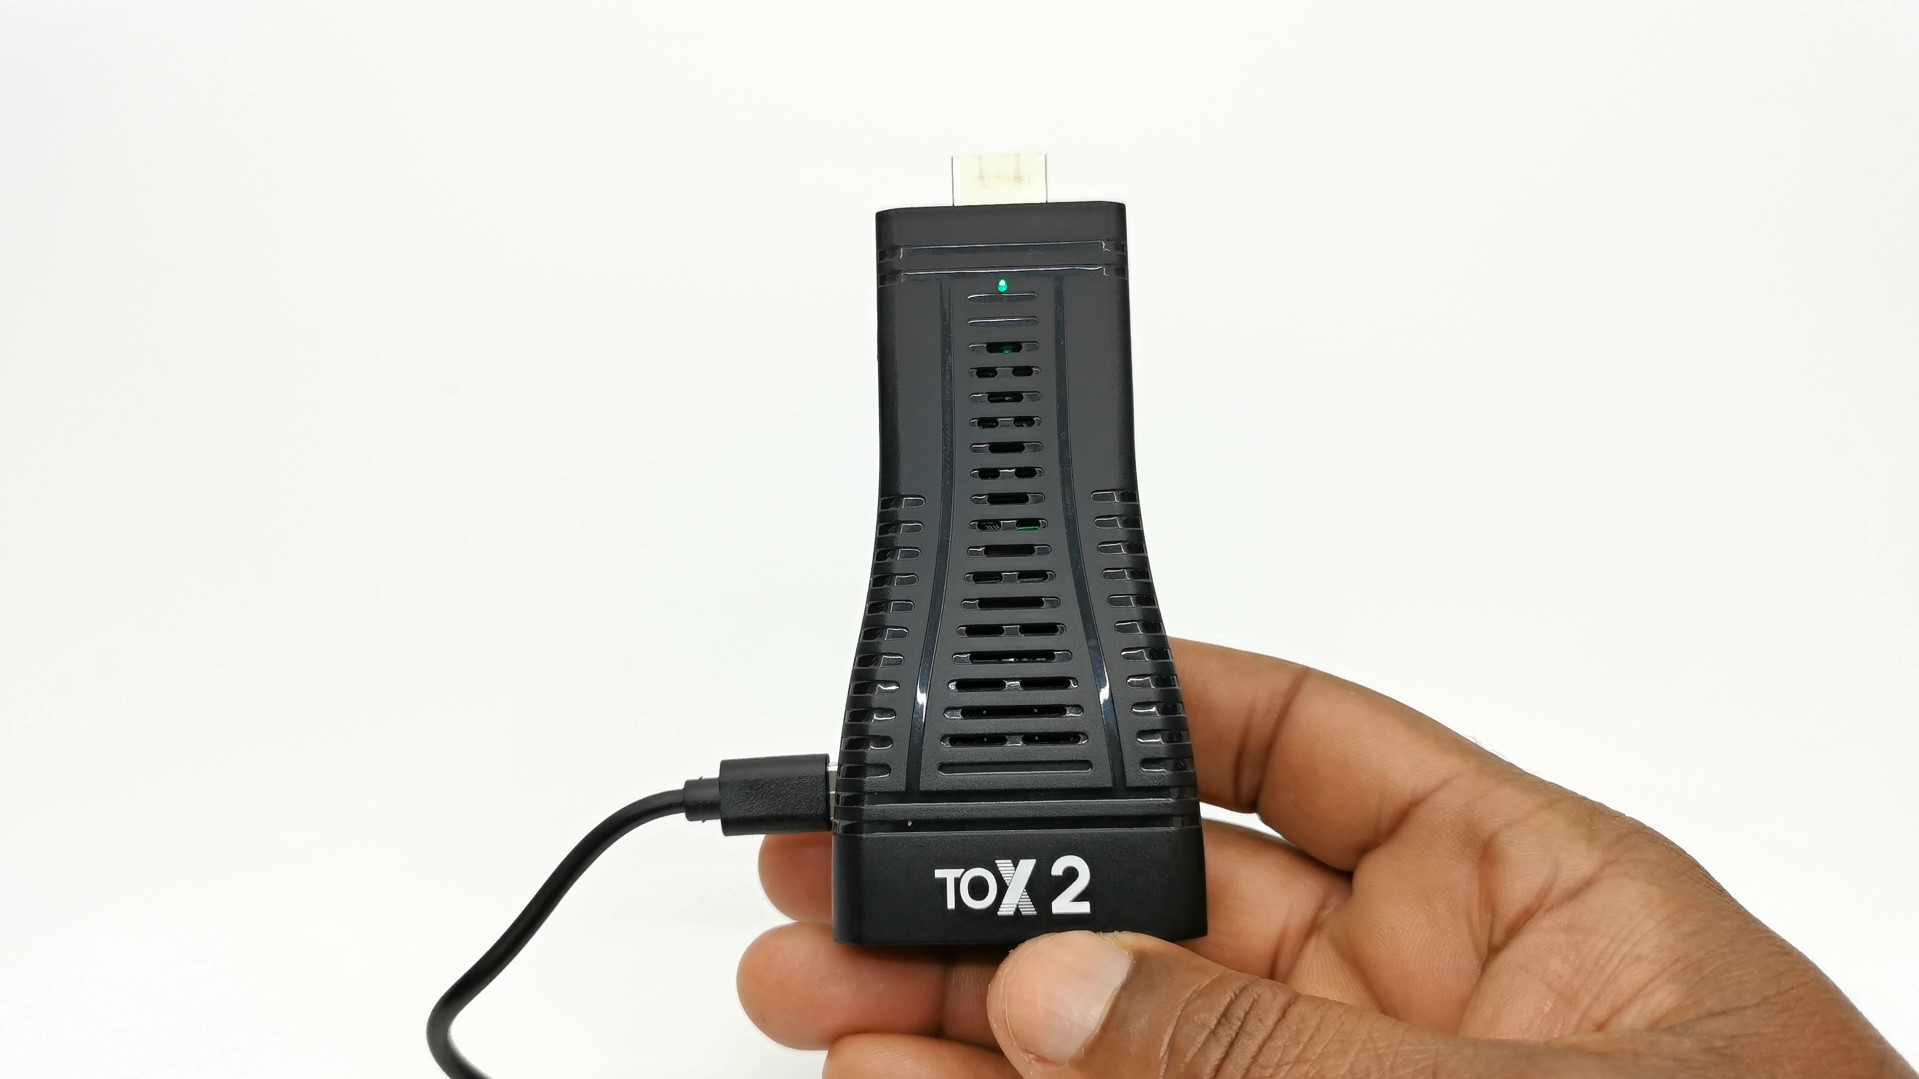 TOX2 TV Stick front view LED pwr light